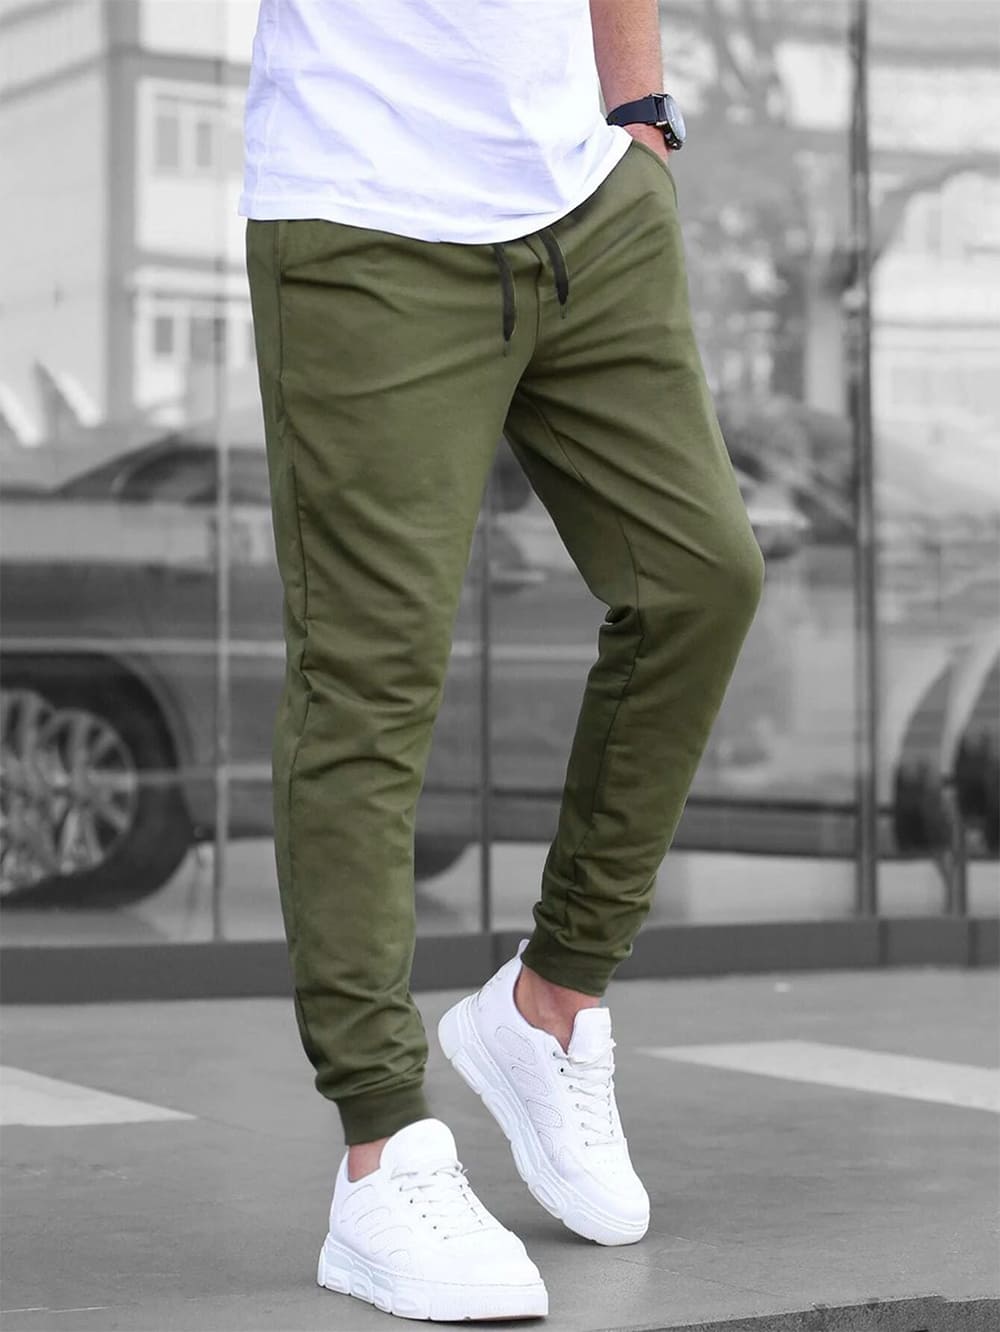 Designer Joggers for Men Fashion Tapered Cropped Pants Athletic Ankle Track  Pants Street Techwear Stretch Trousers - Walmart.com